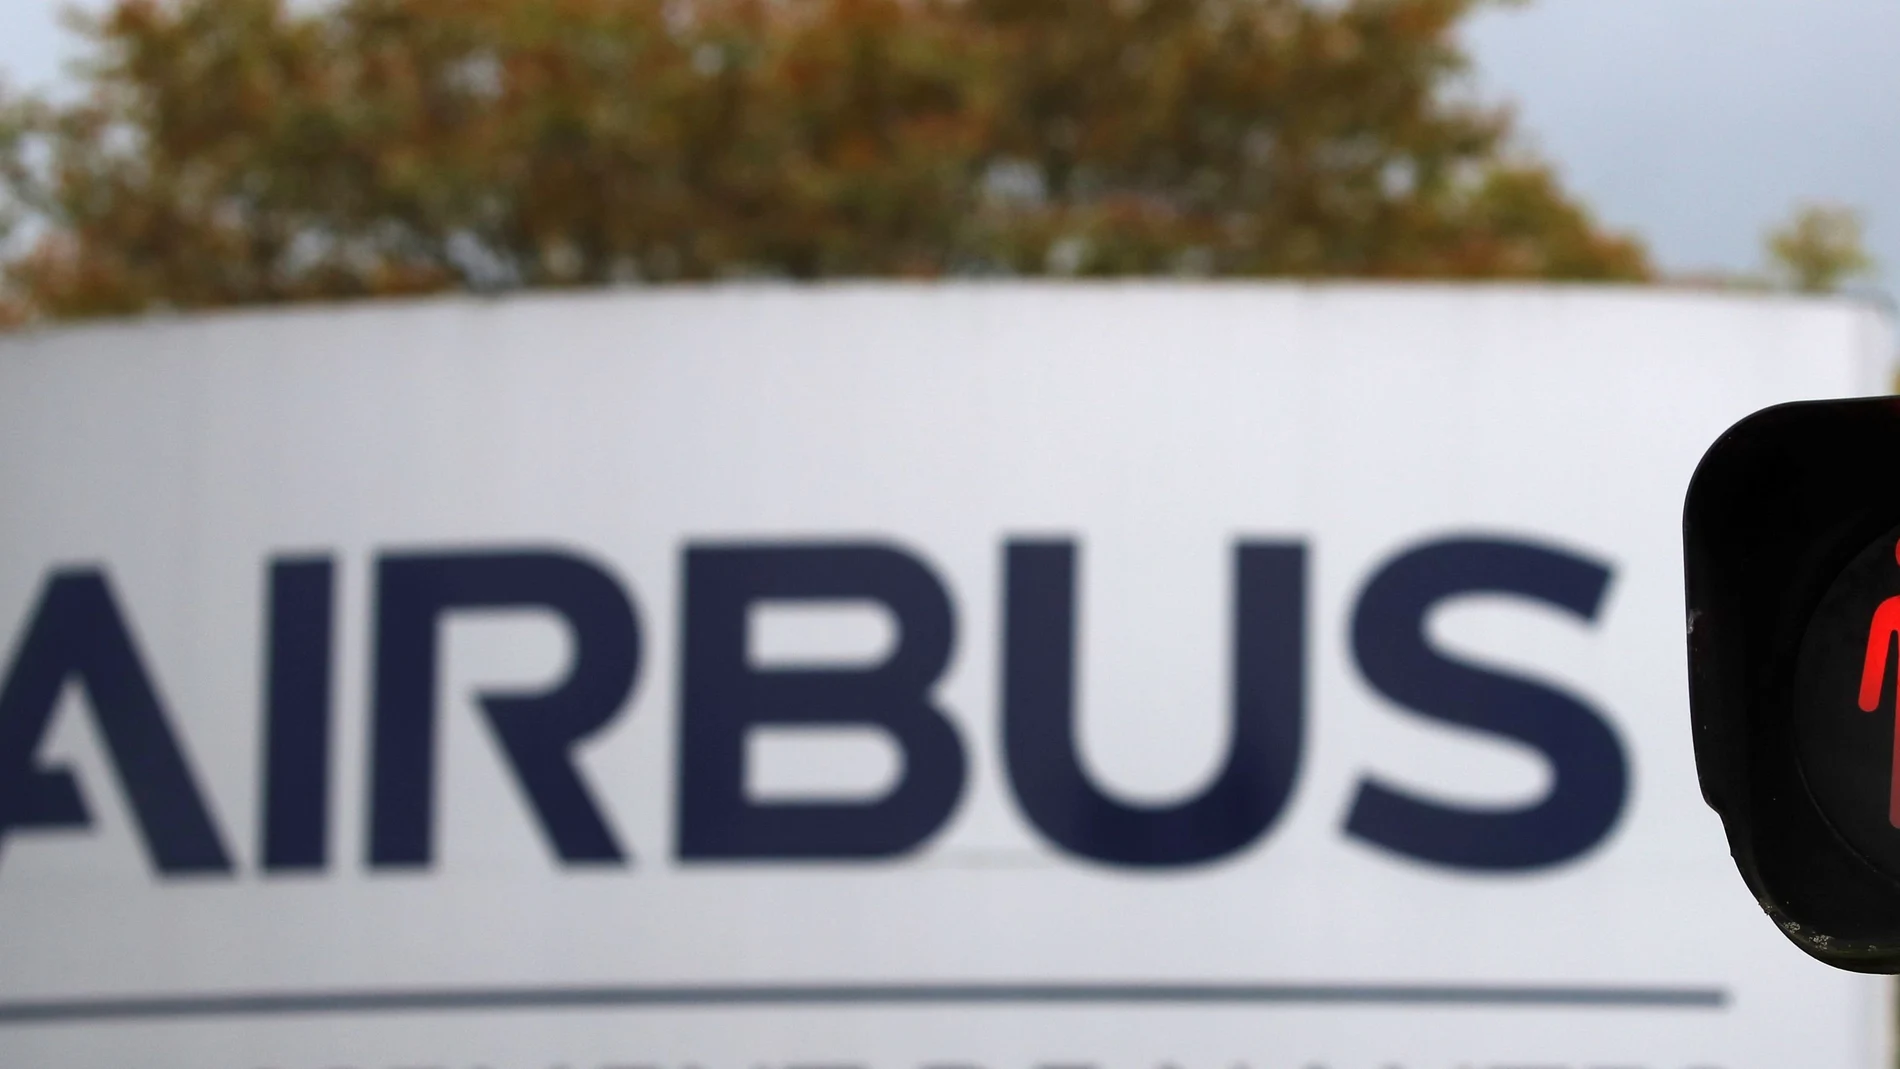 The logo of Airbus is pictured at the entrance of the Airbus facility in Bouguenais